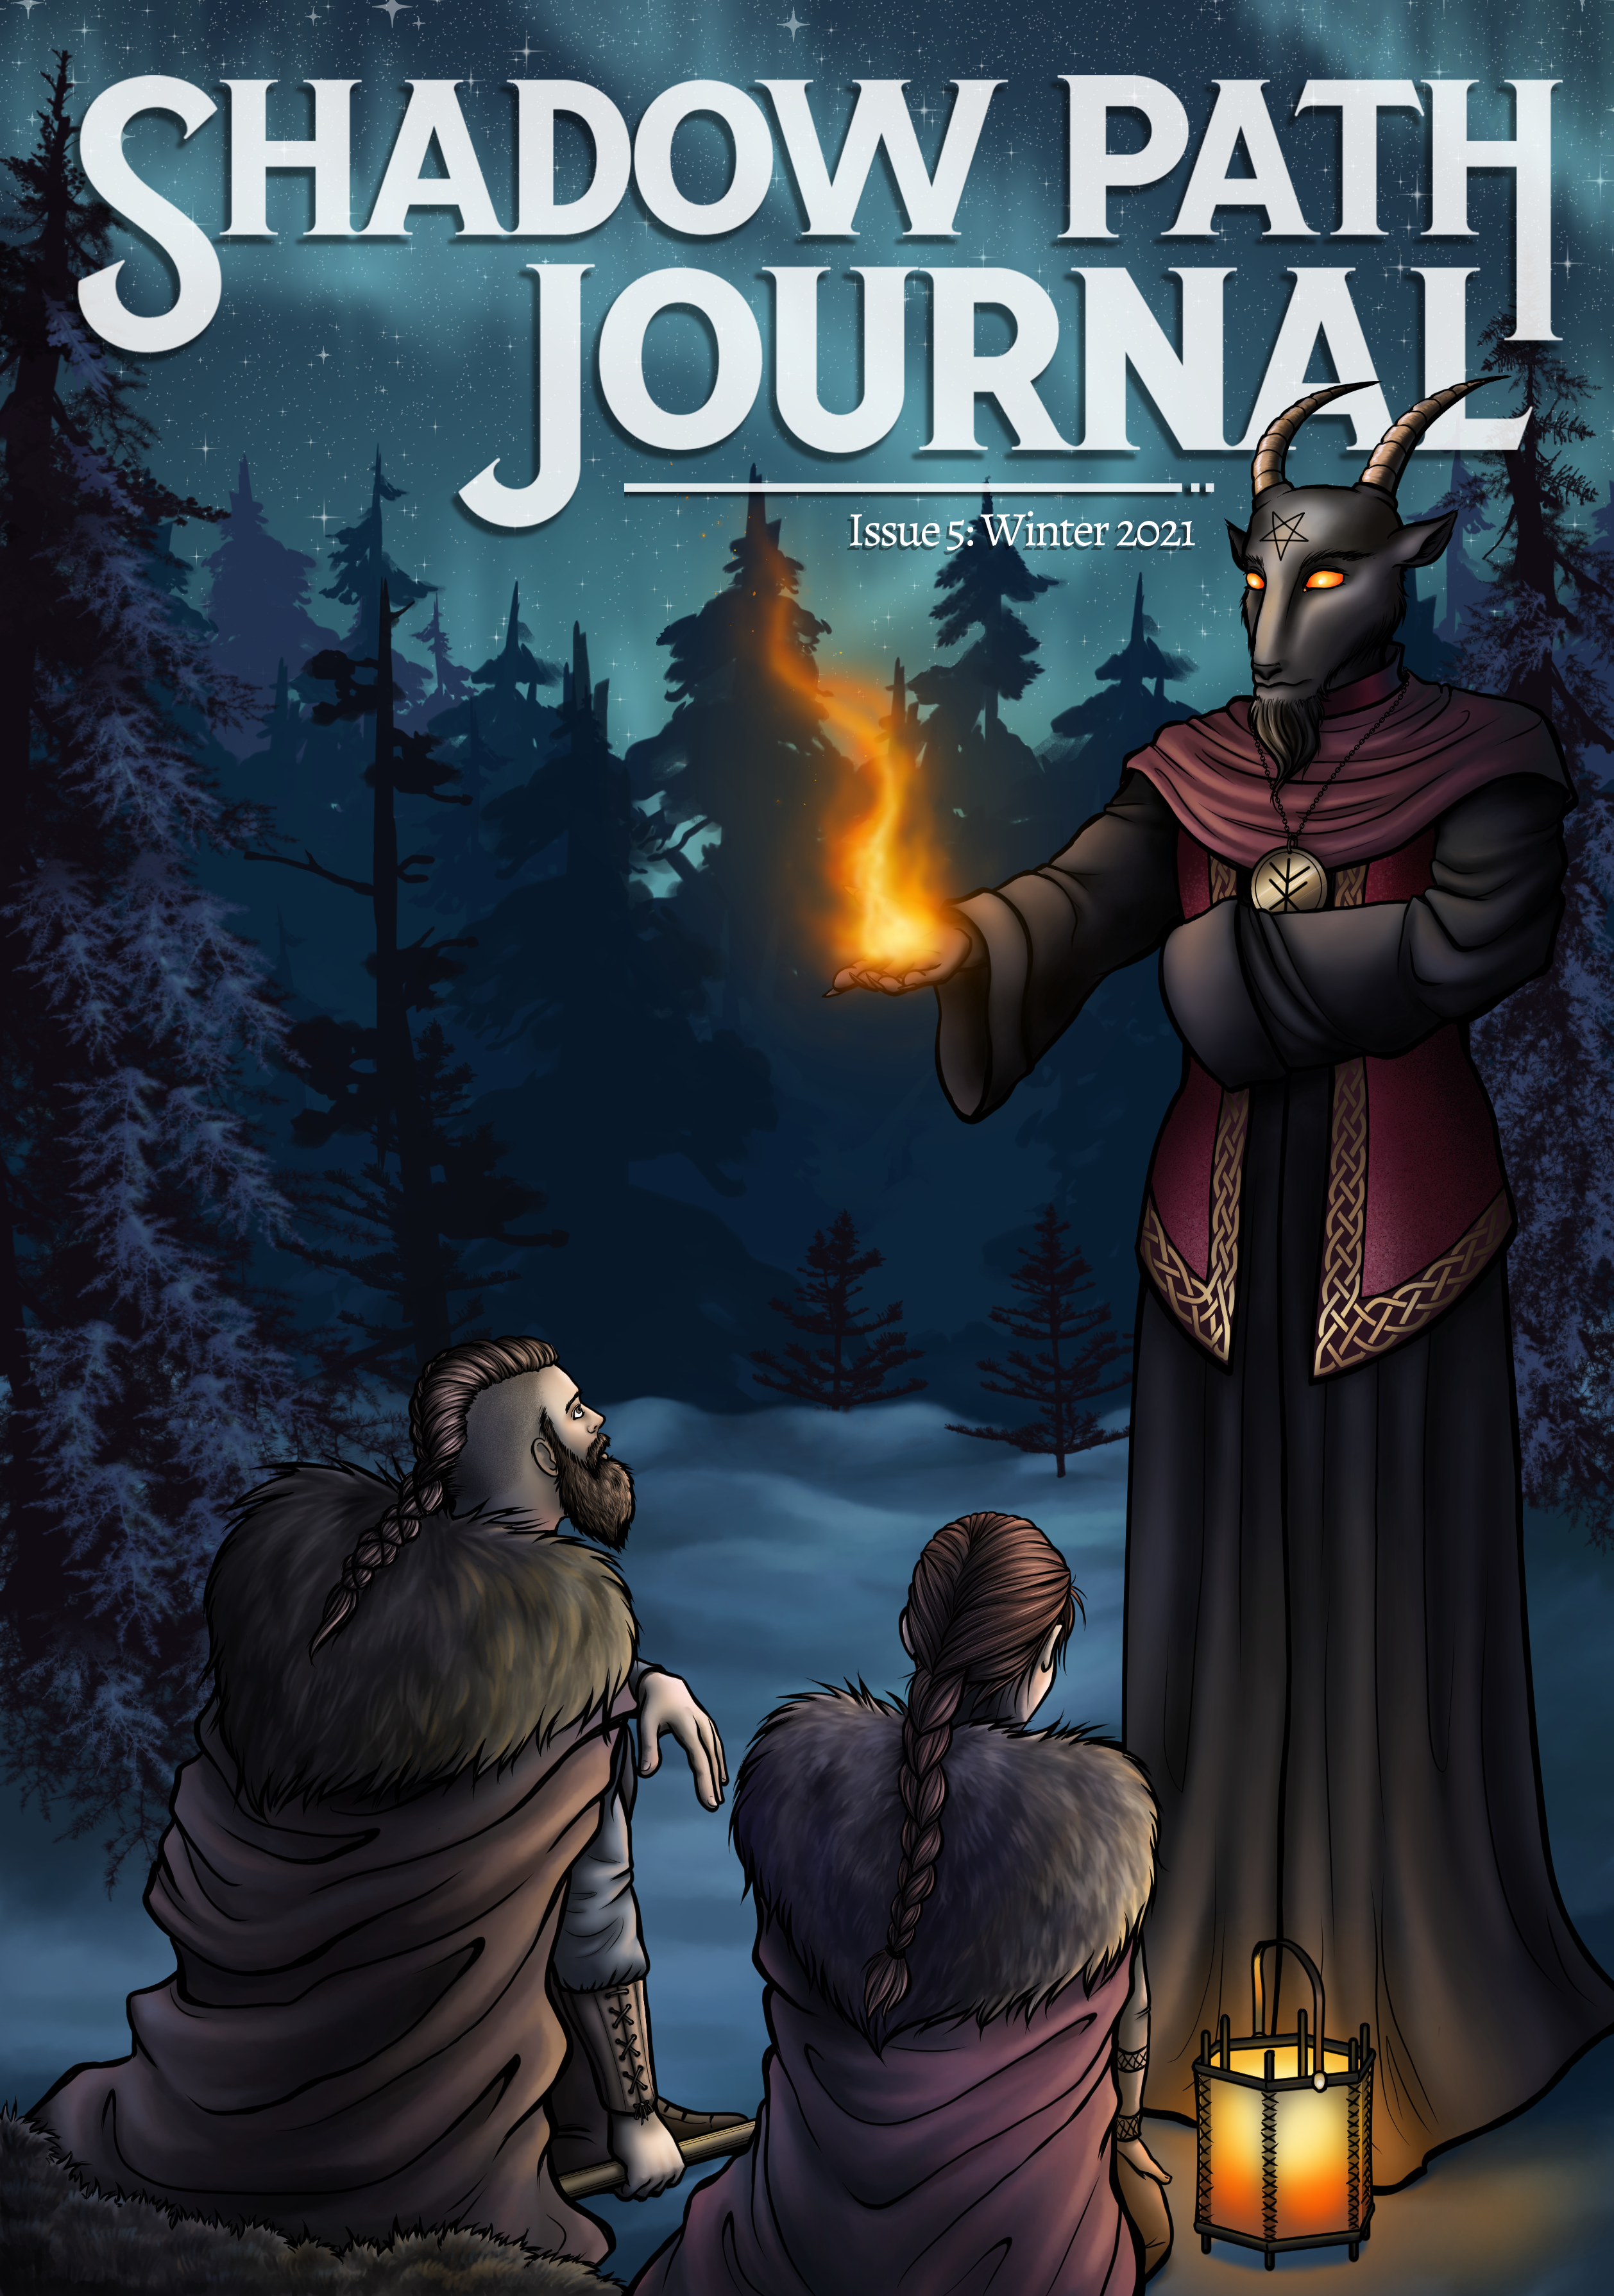 Hard Copies of the Shadow Path Journal Available Now